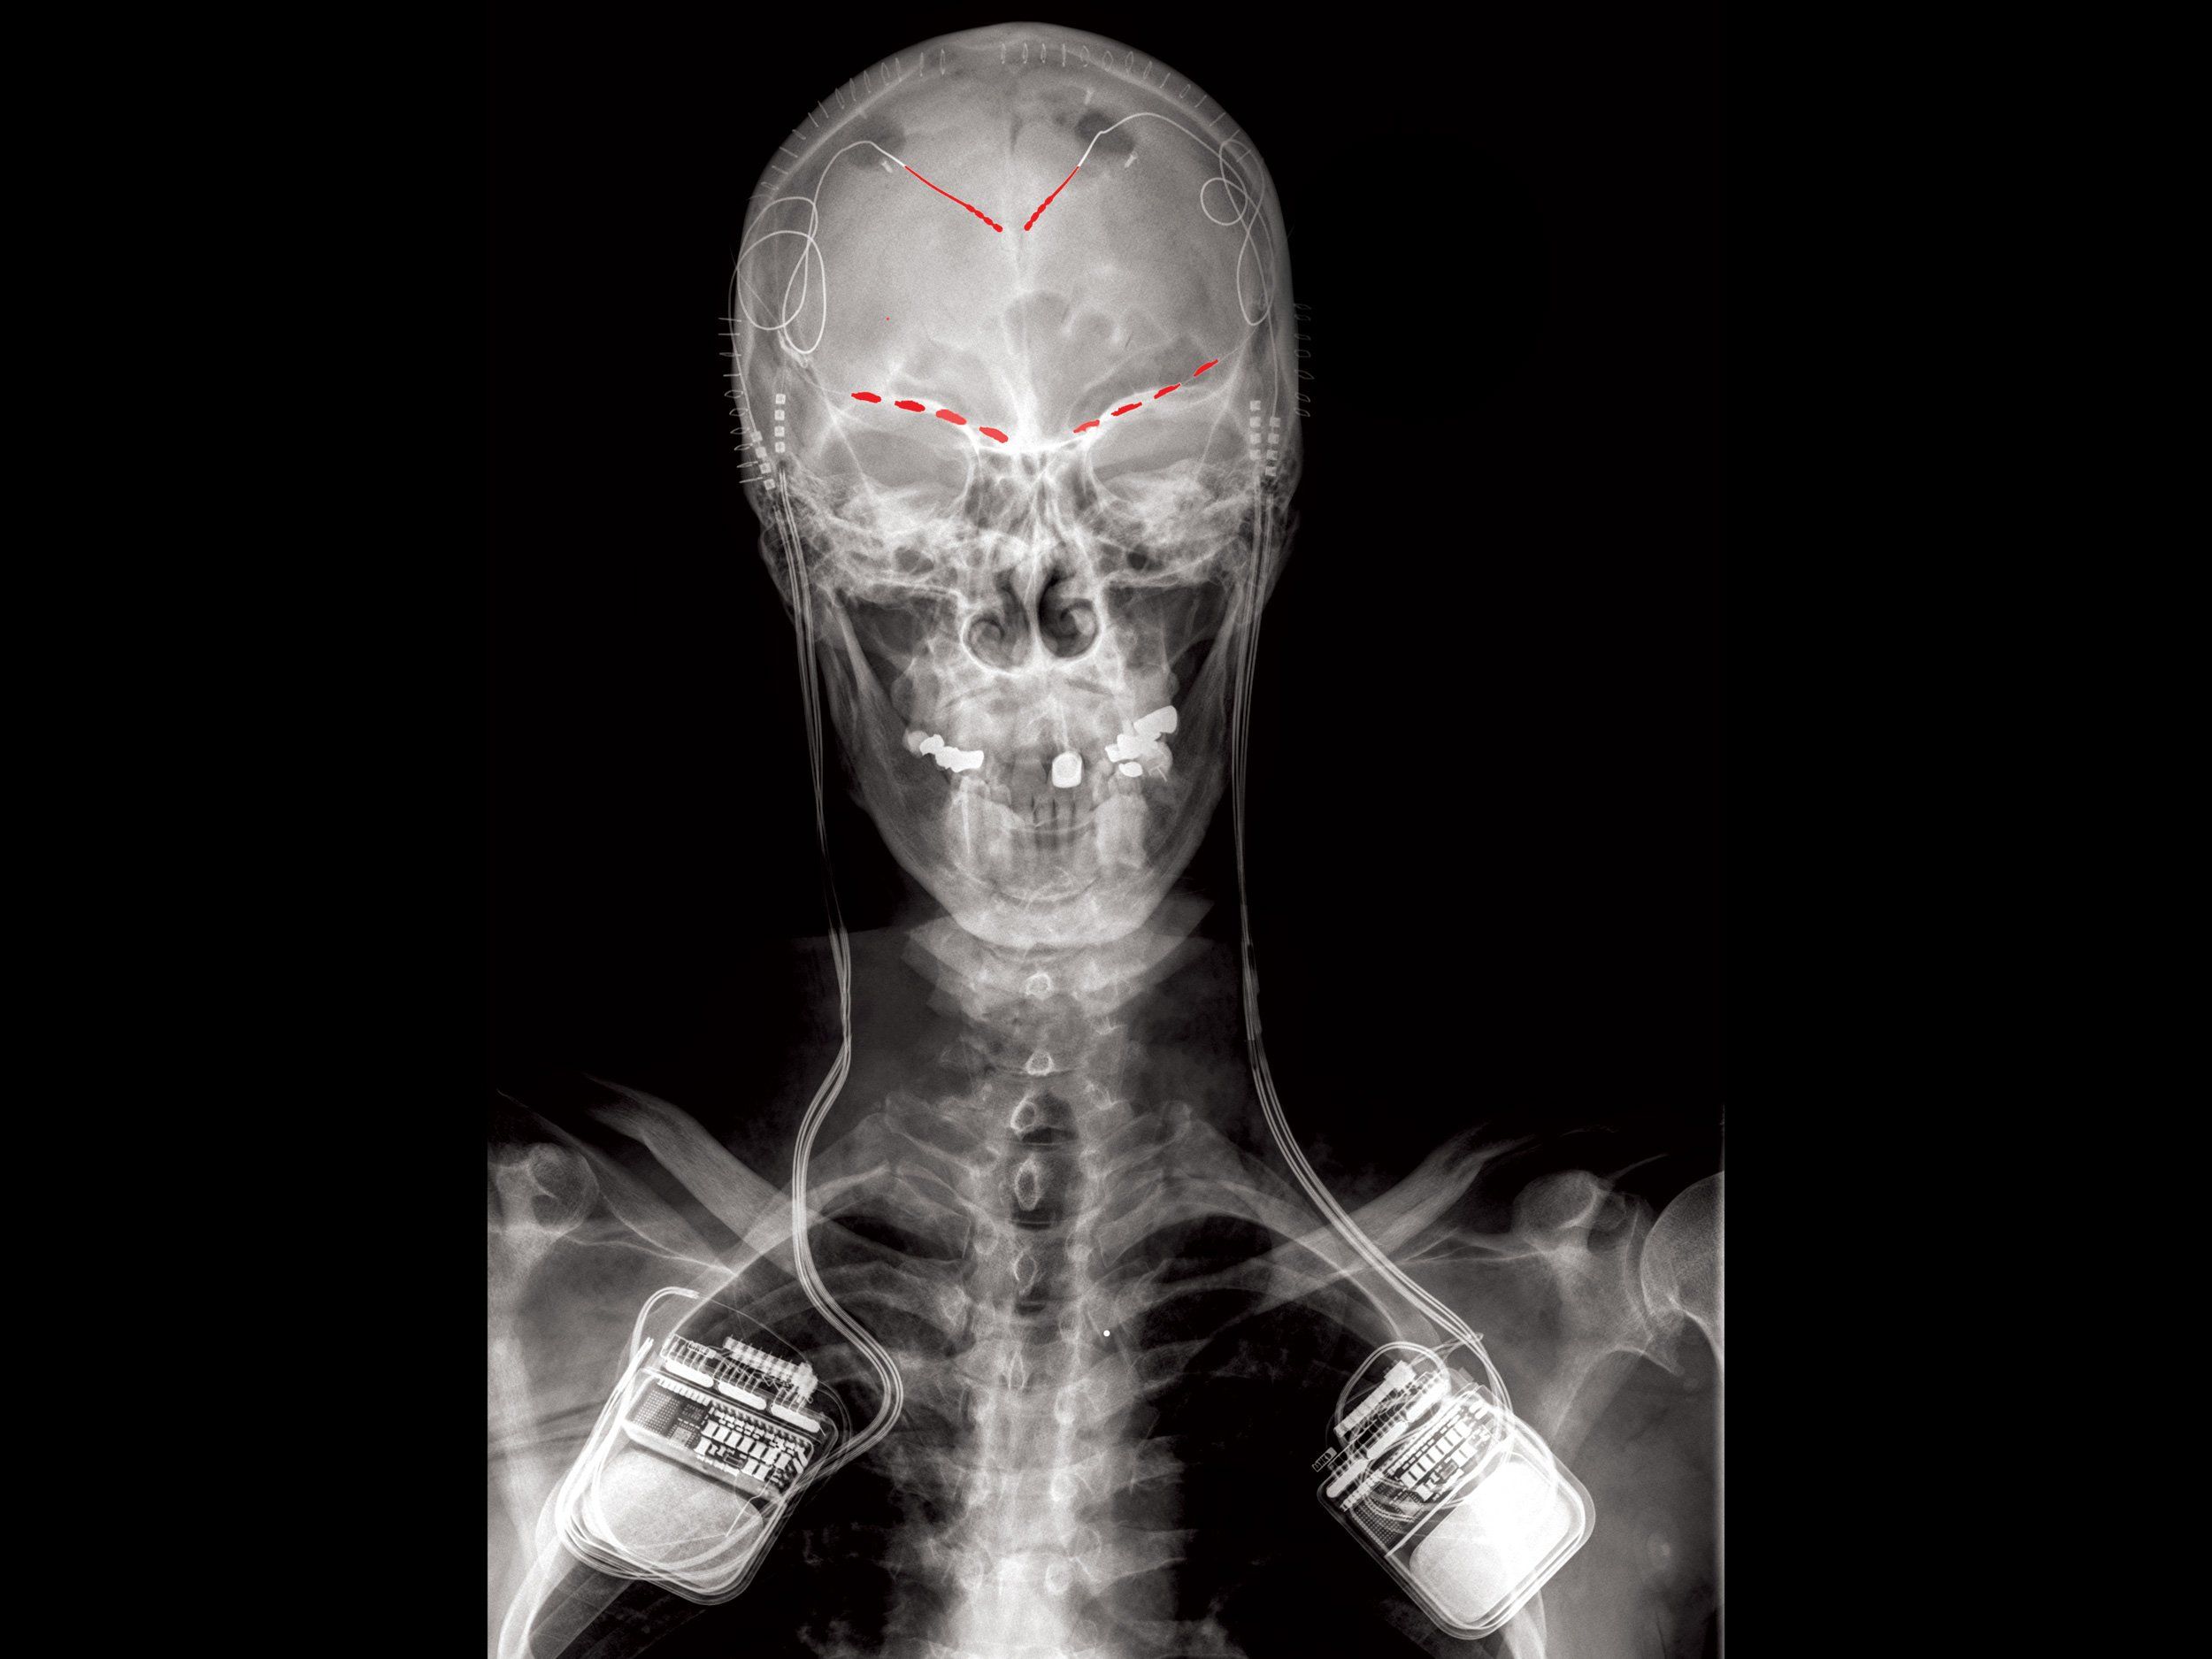 An x-ray of a human skull and shoulders. There are red dotted lines along the eyebrow area and two implants, one in each shoulder.